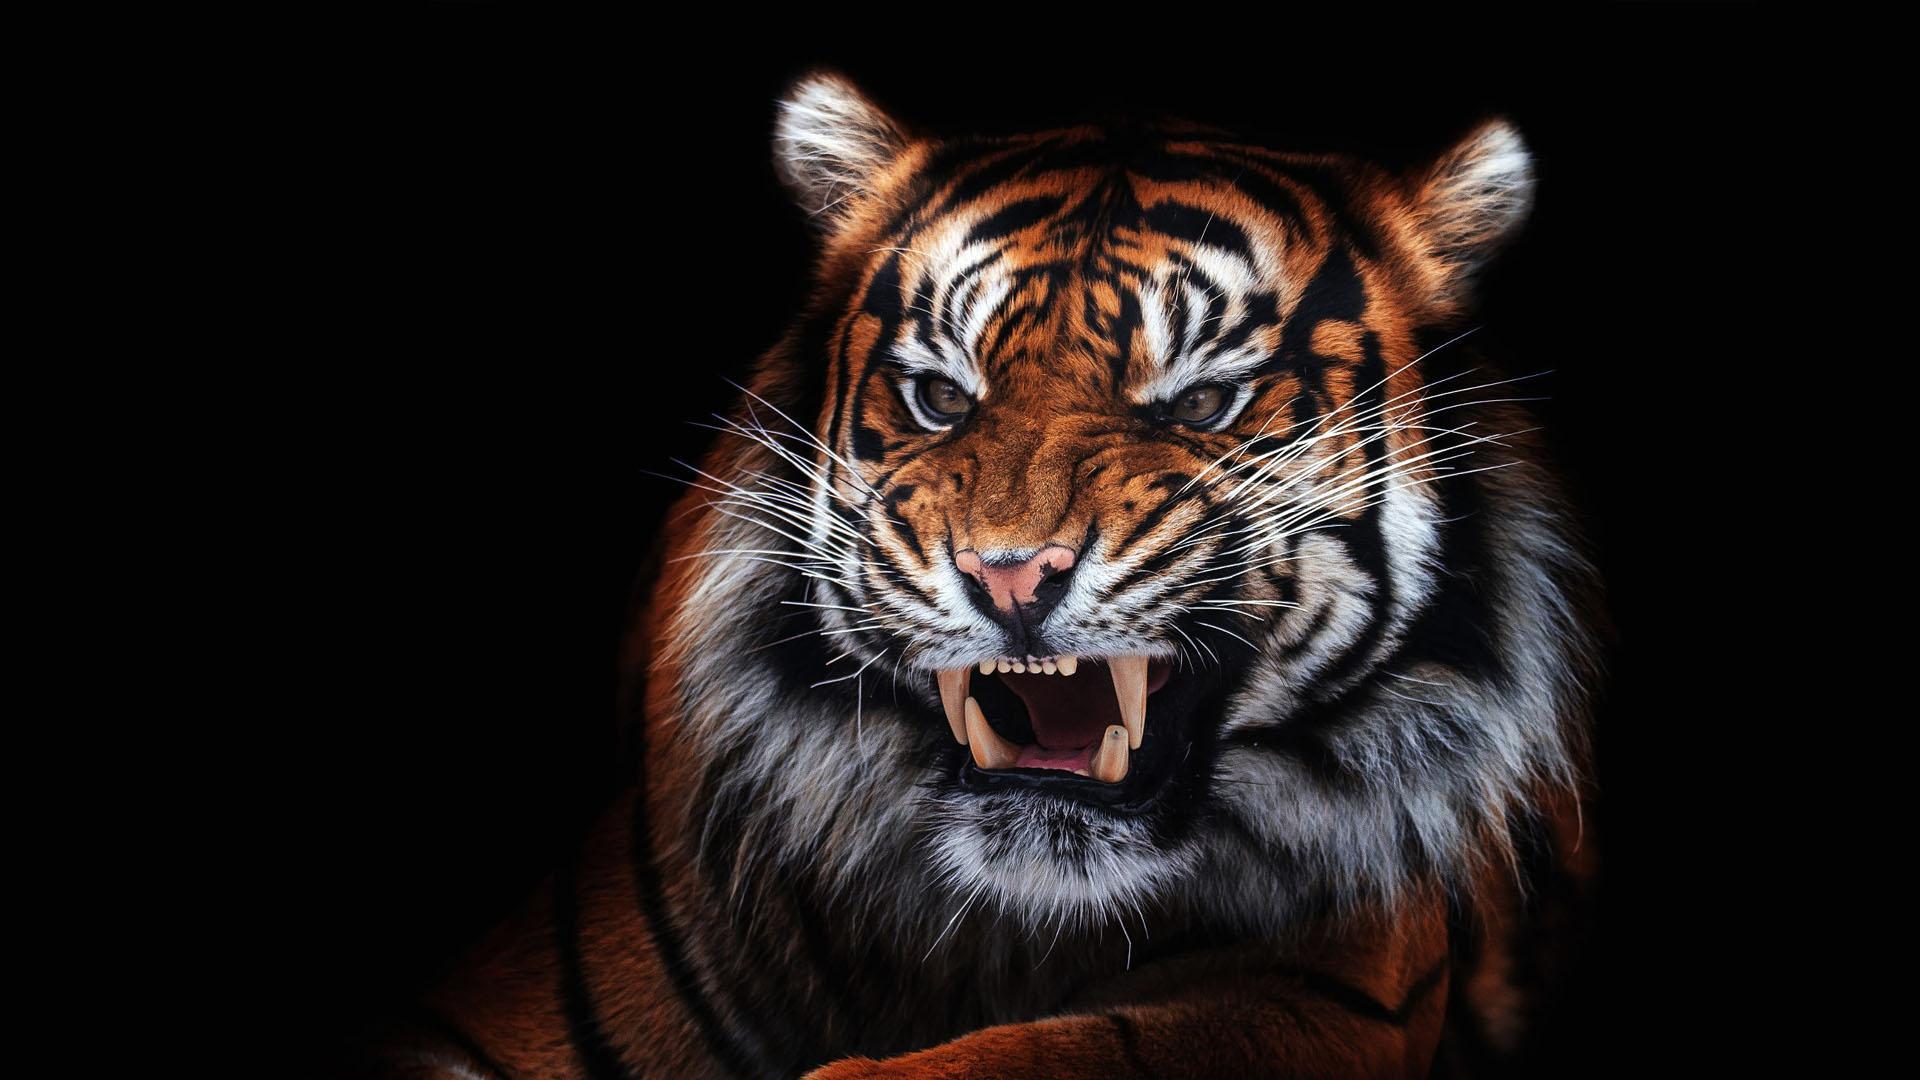  Tiger  Wallpaper  HD  backgrounds  themes for Android  